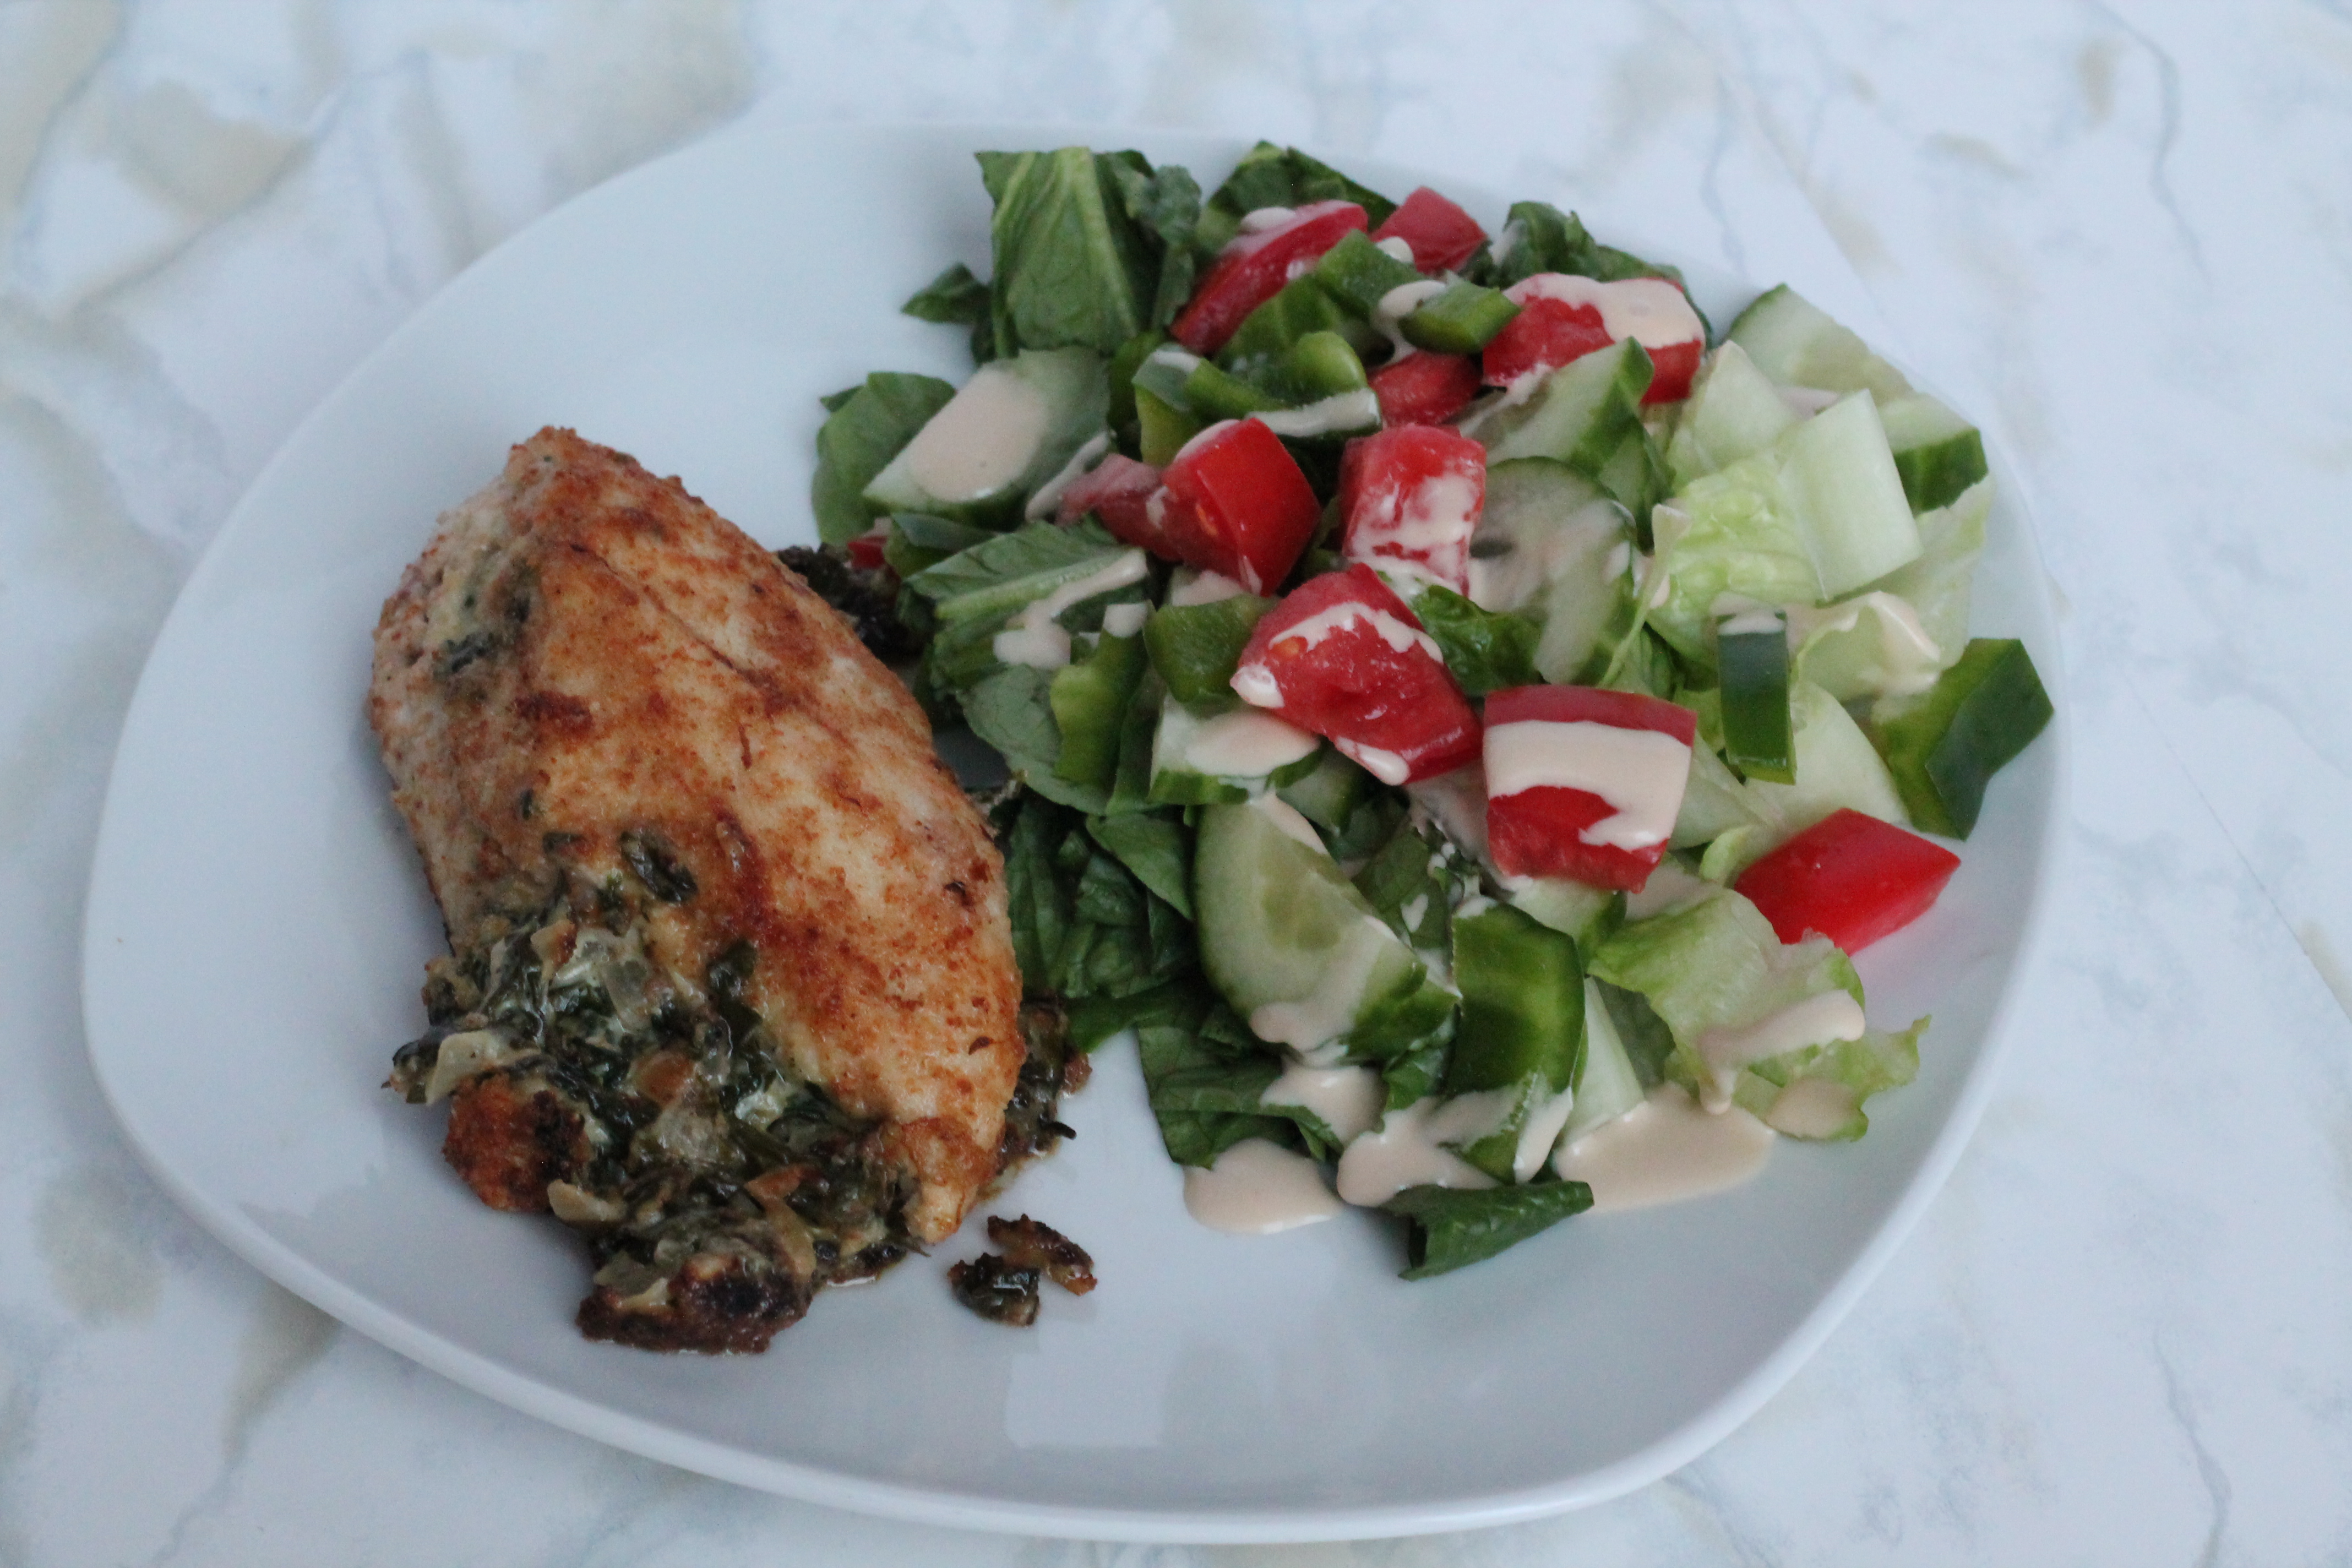 Spinach & Goat Cheese Stuffed Chicken